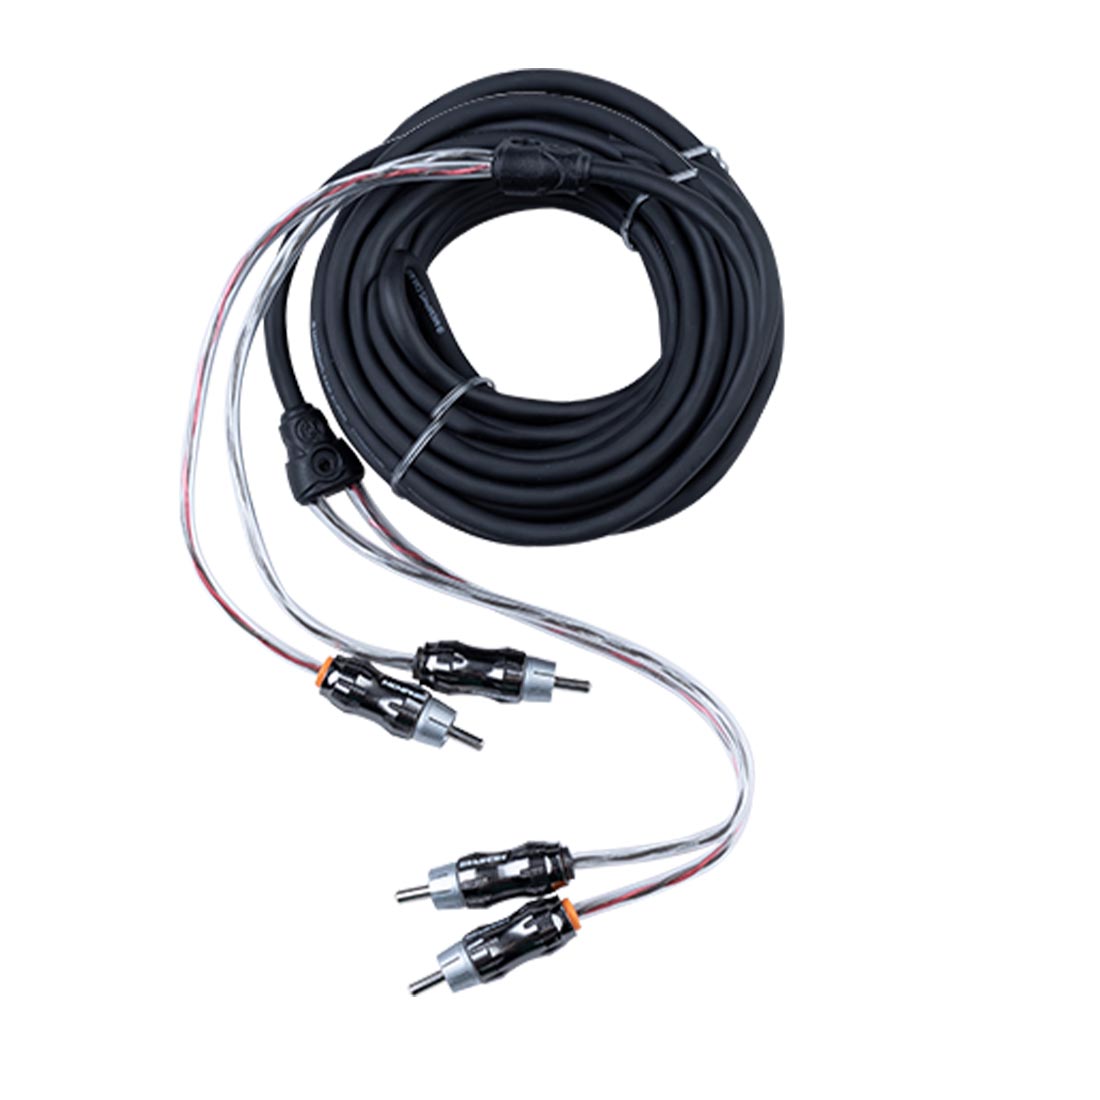 Memphis Audio UTPF-21 21-foot, 2-Channel Ultra Twisted Pair Interconnect Cables